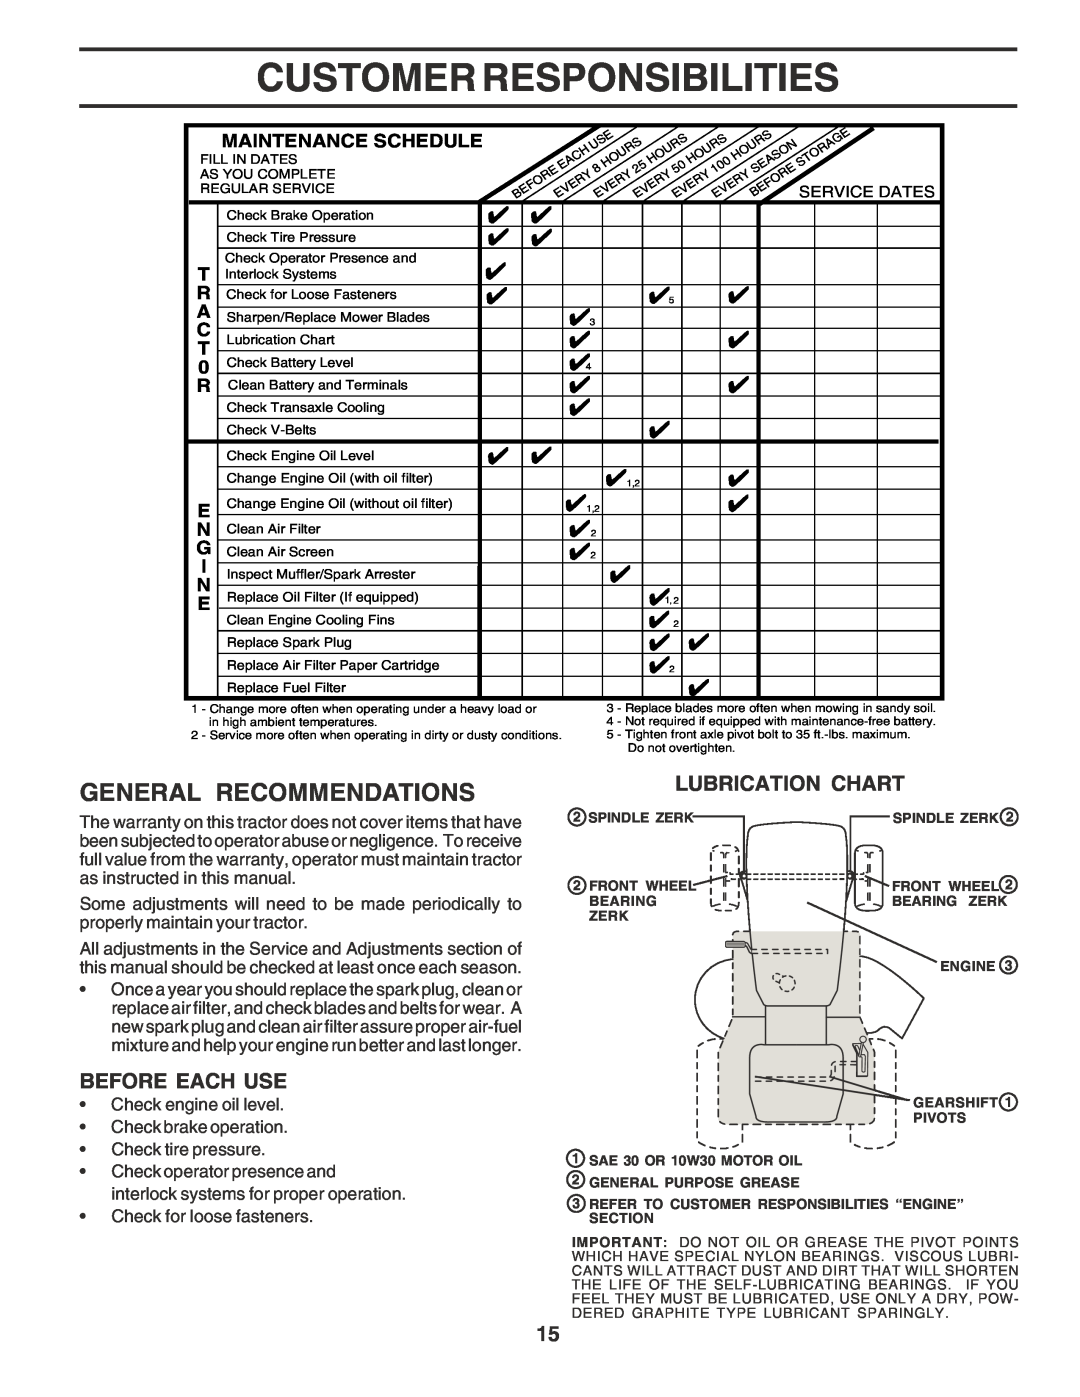 Poulan 181347 Customer Responsibilities, General Recommendations, Lubrication Chart, Before Each Use, Maintenance Schedule 